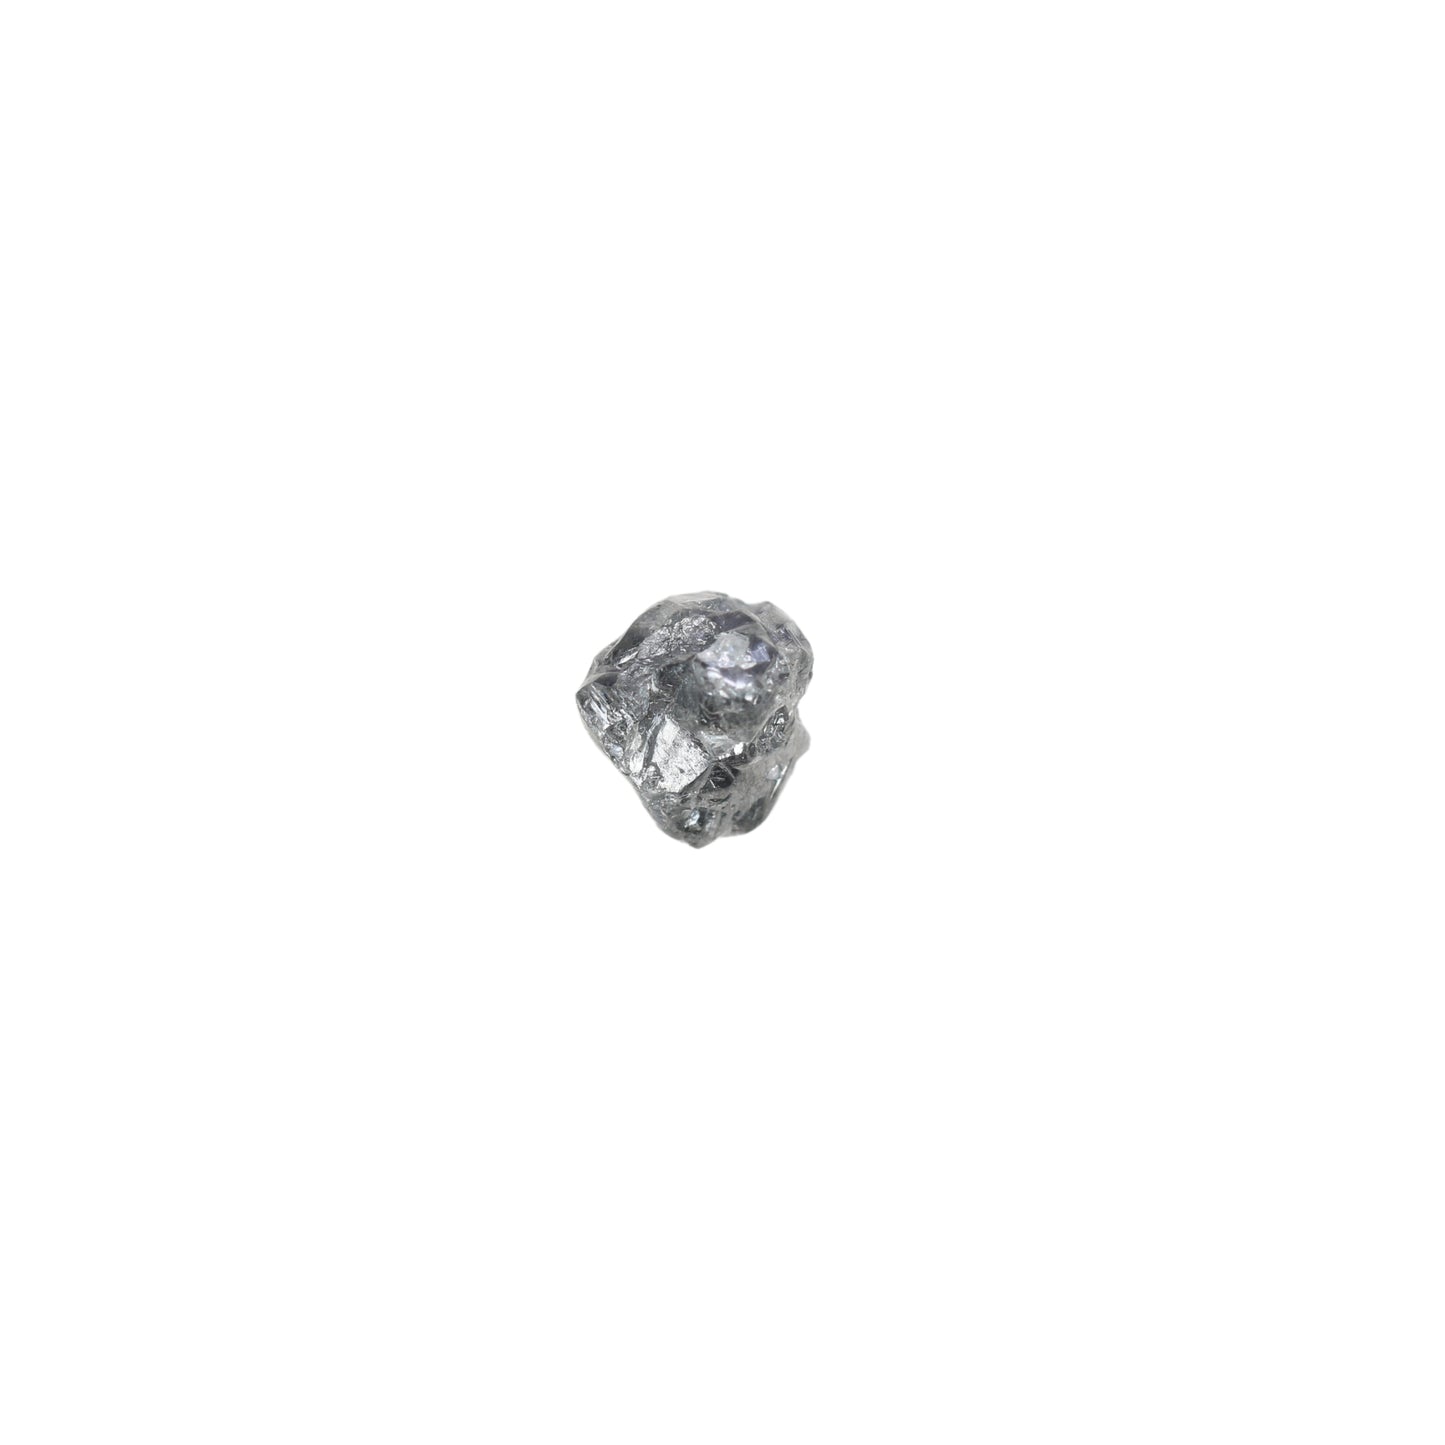 2.93 CT Loose Salt And Pepper Rough Uncut Diamond For Engagement Ring | Gift For Girl Friend